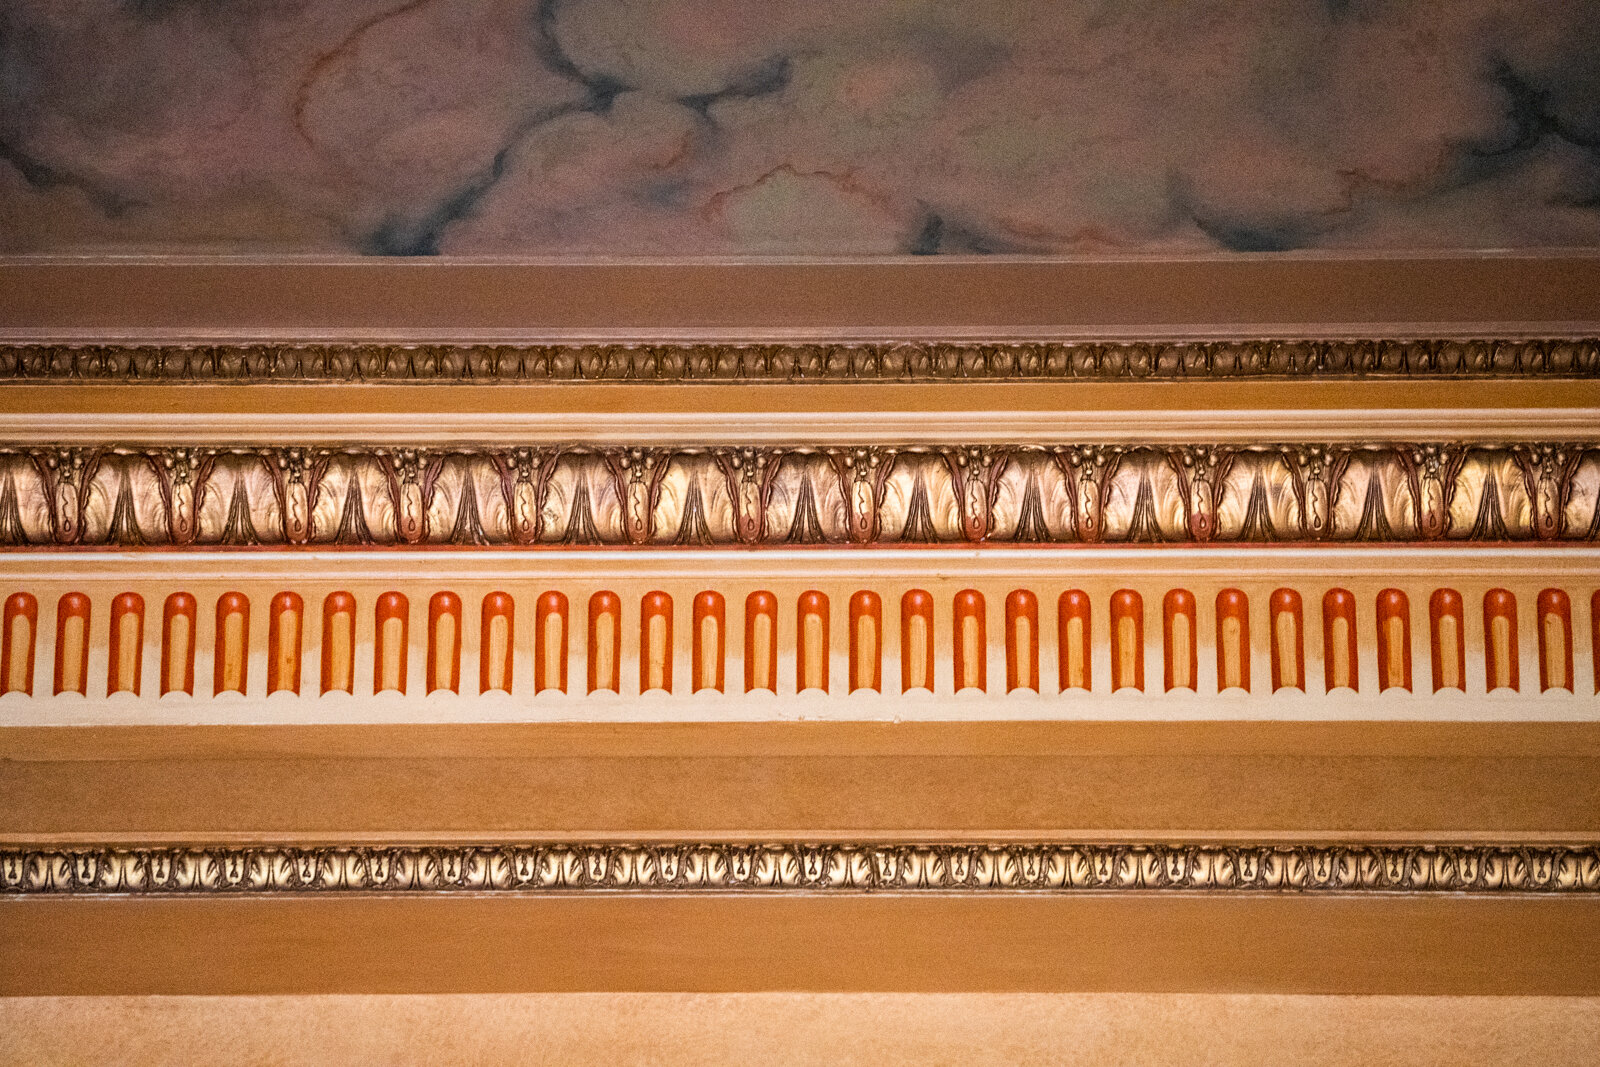  Plaster mouldings with leaf motif and arch pattern, painted gold with red and brown accents   